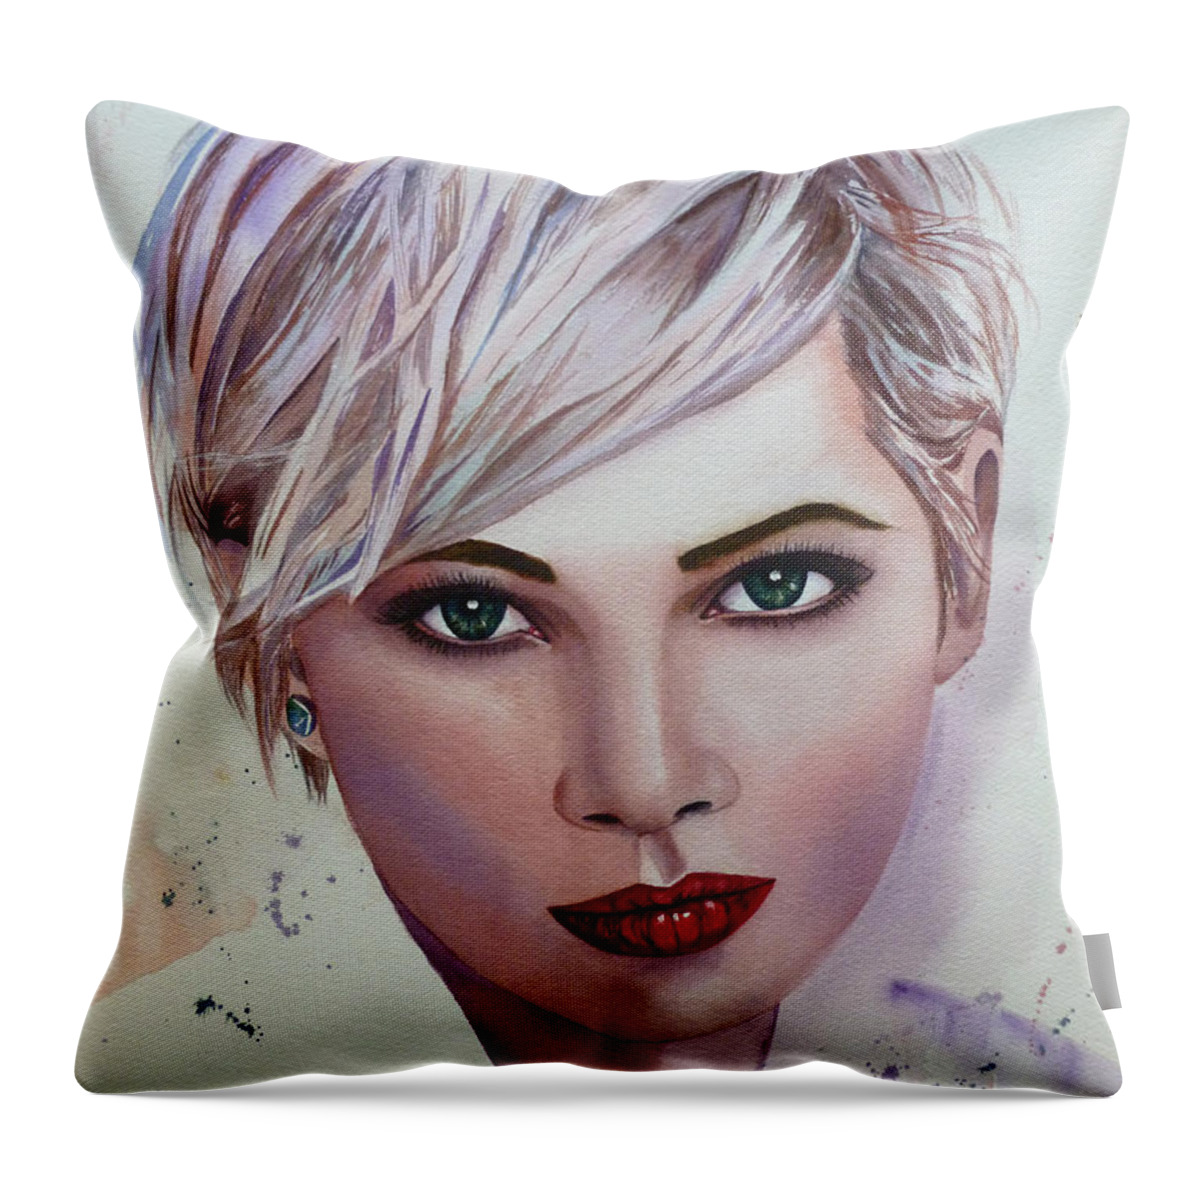 Portrait Of A Woman Throw Pillow featuring the painting In Her Eyes by Michal Madison